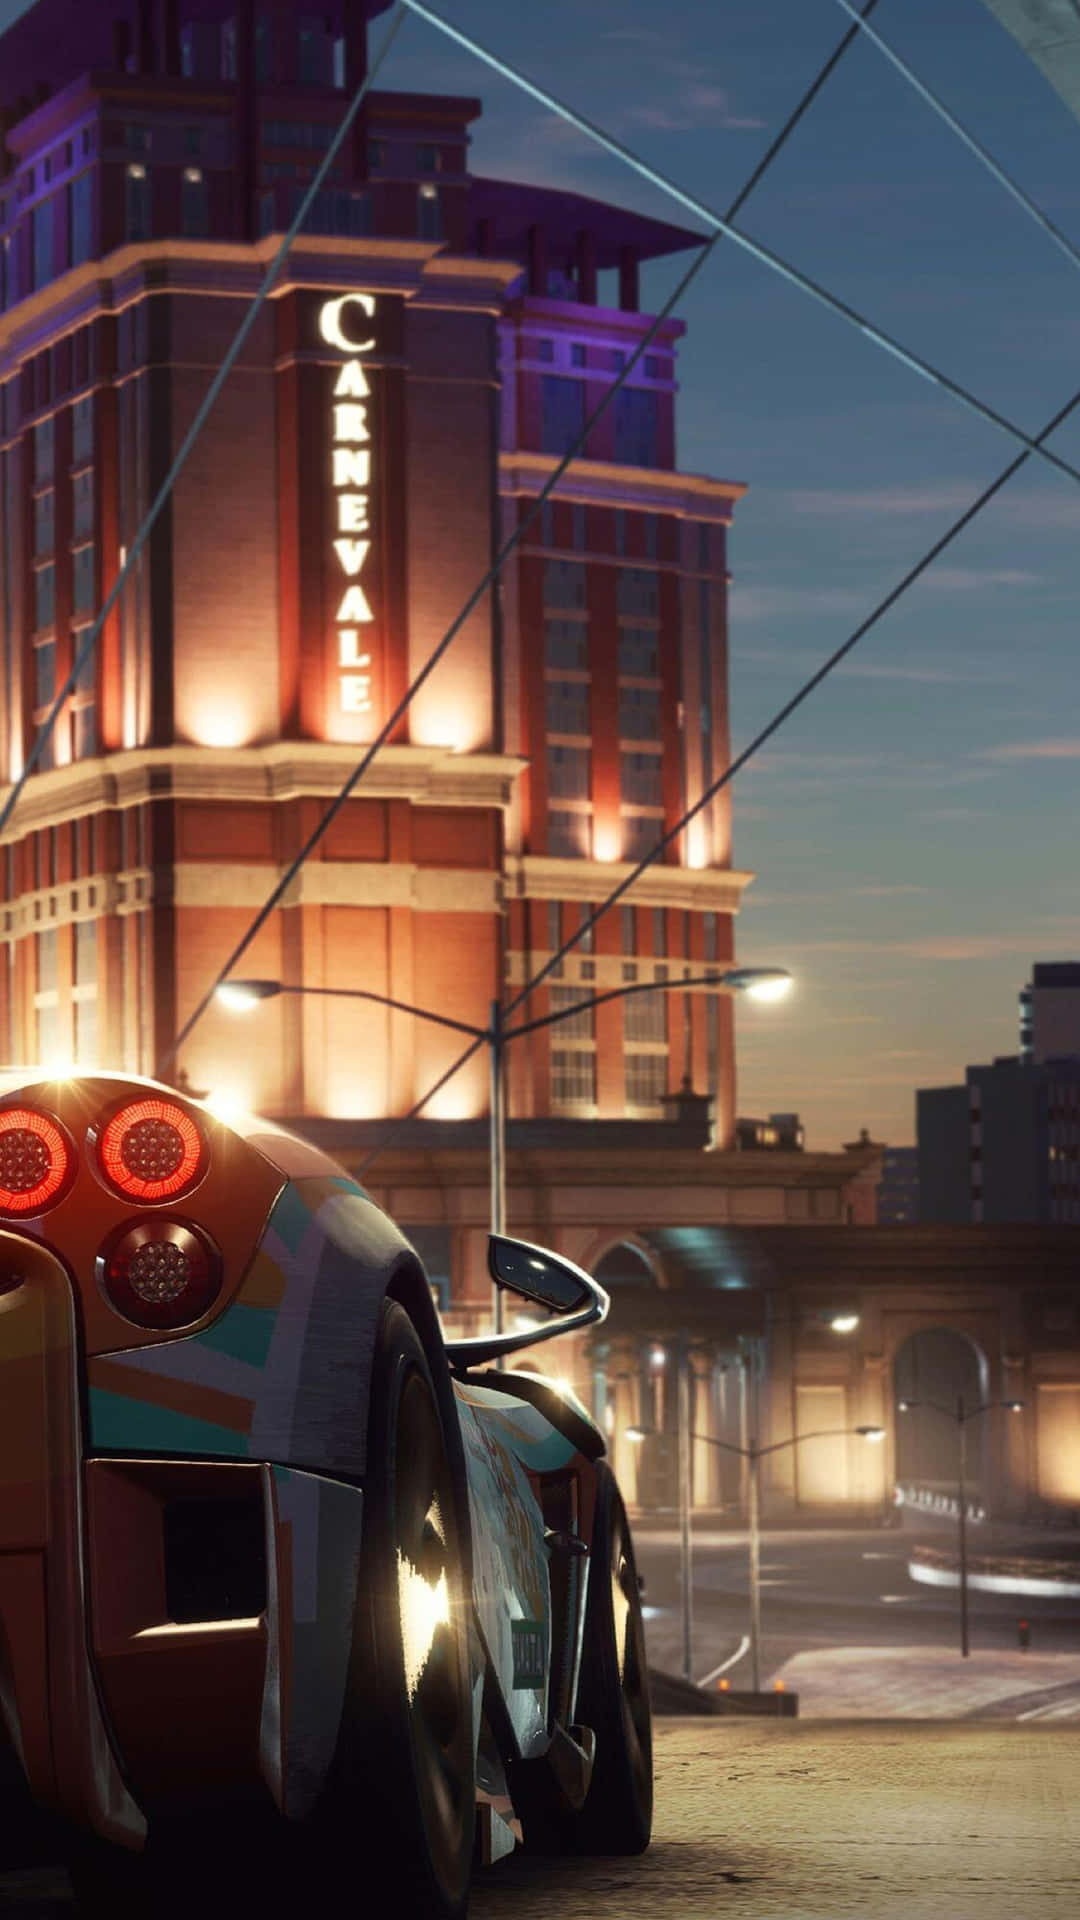 Iphonexs Bakgrund Need For Speed Payback Med Carnevale-byggnad.